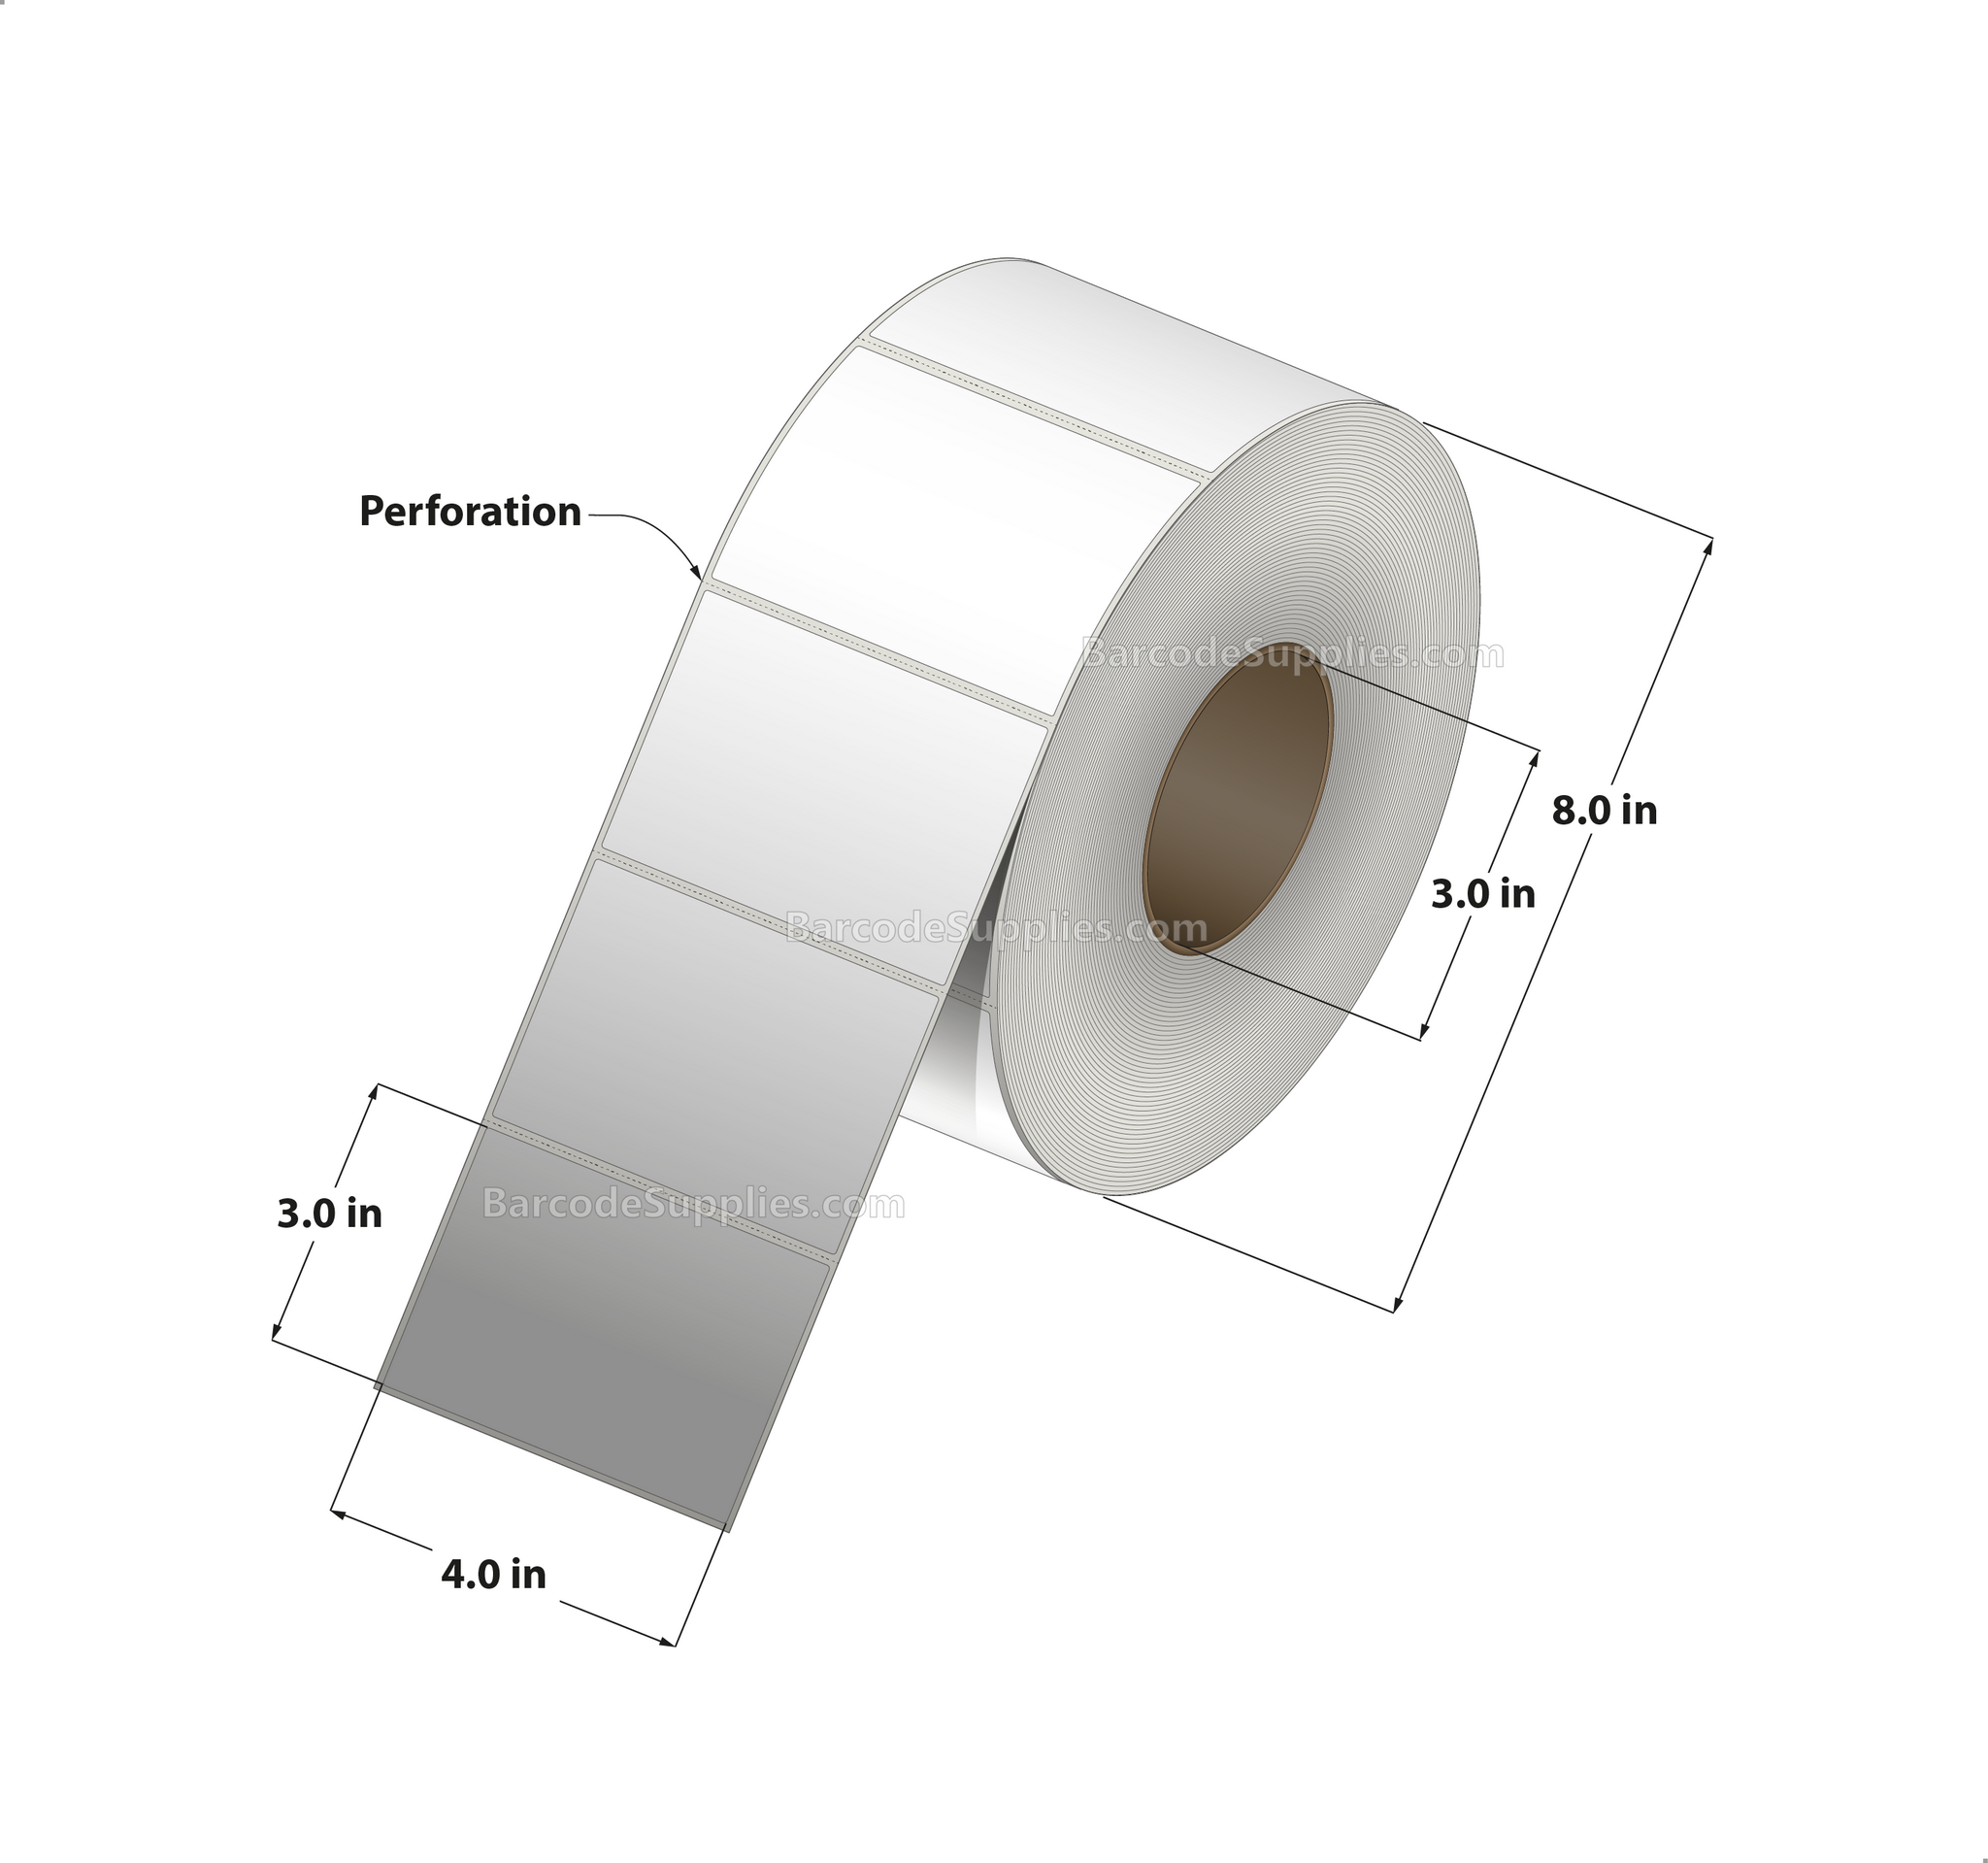 4 x 4 Thermal Transfer White Labels With Removable Adhesive - Perforated - 1500 Labels Per Roll - Carton Of 4 Rolls - 6000 Labels Total - MPN: RE-4-4-1500-3